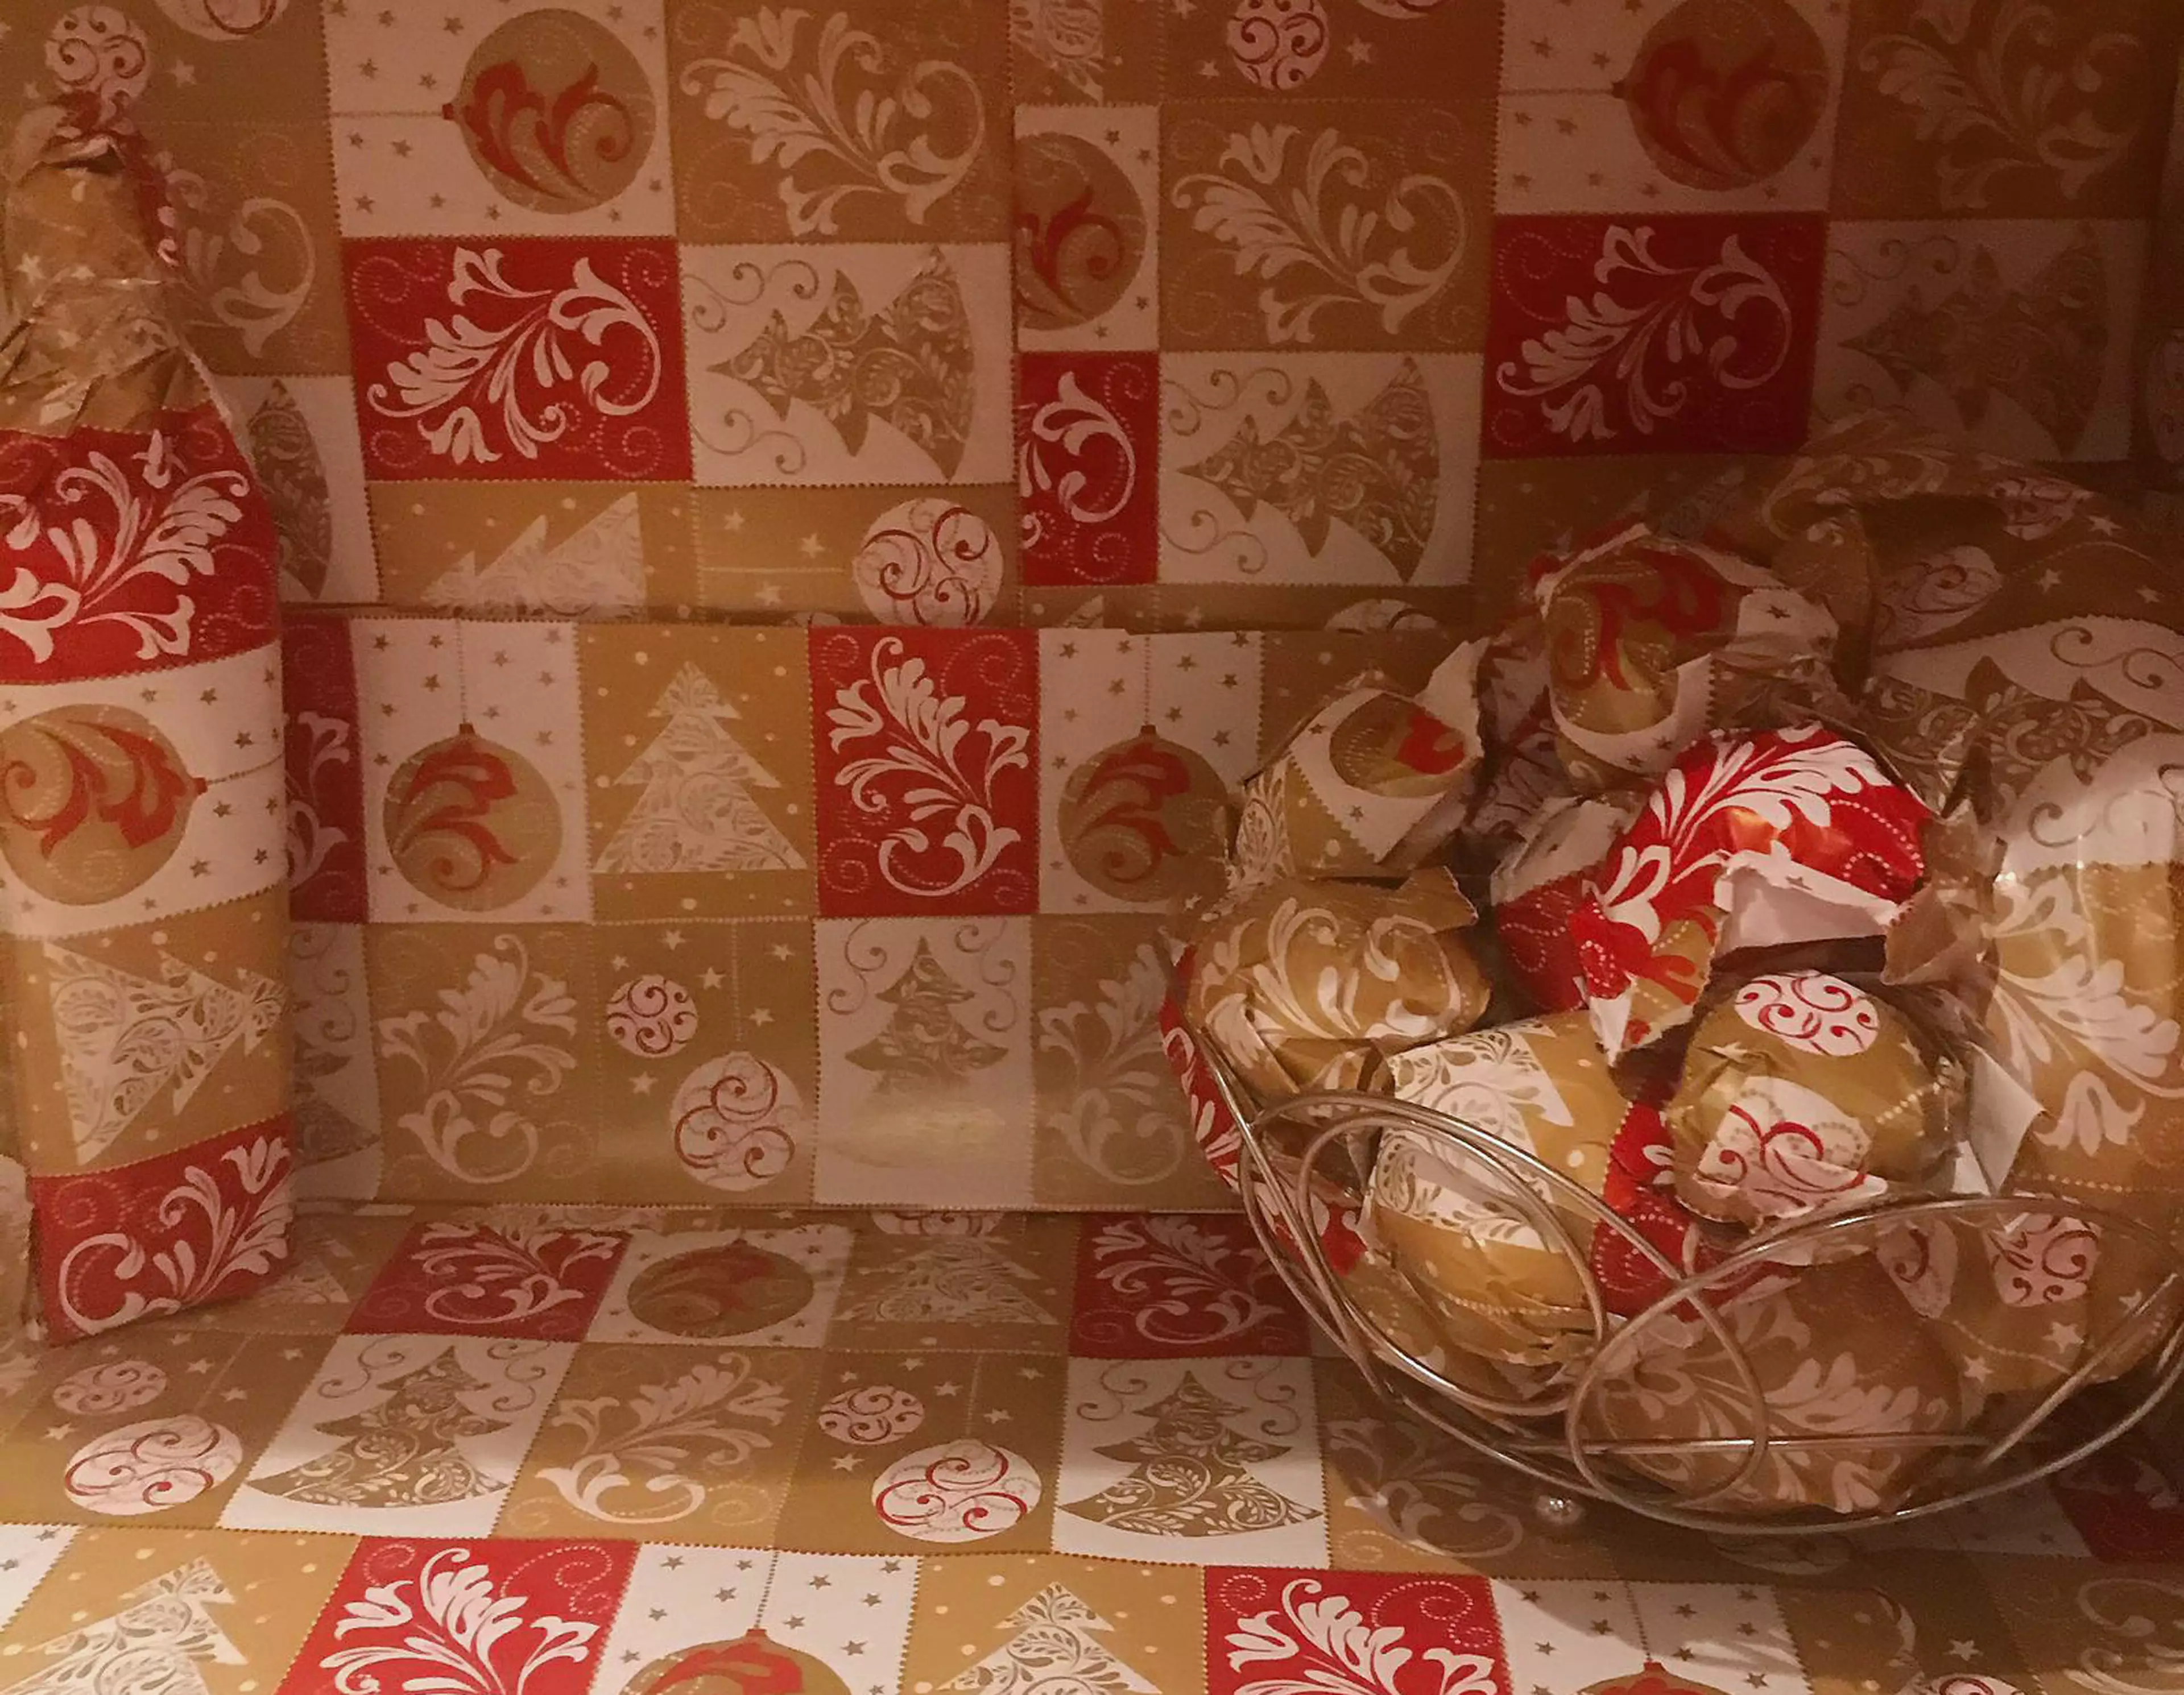 They spent two hours wrapping the contents of their kitchen in Christmas paper. (